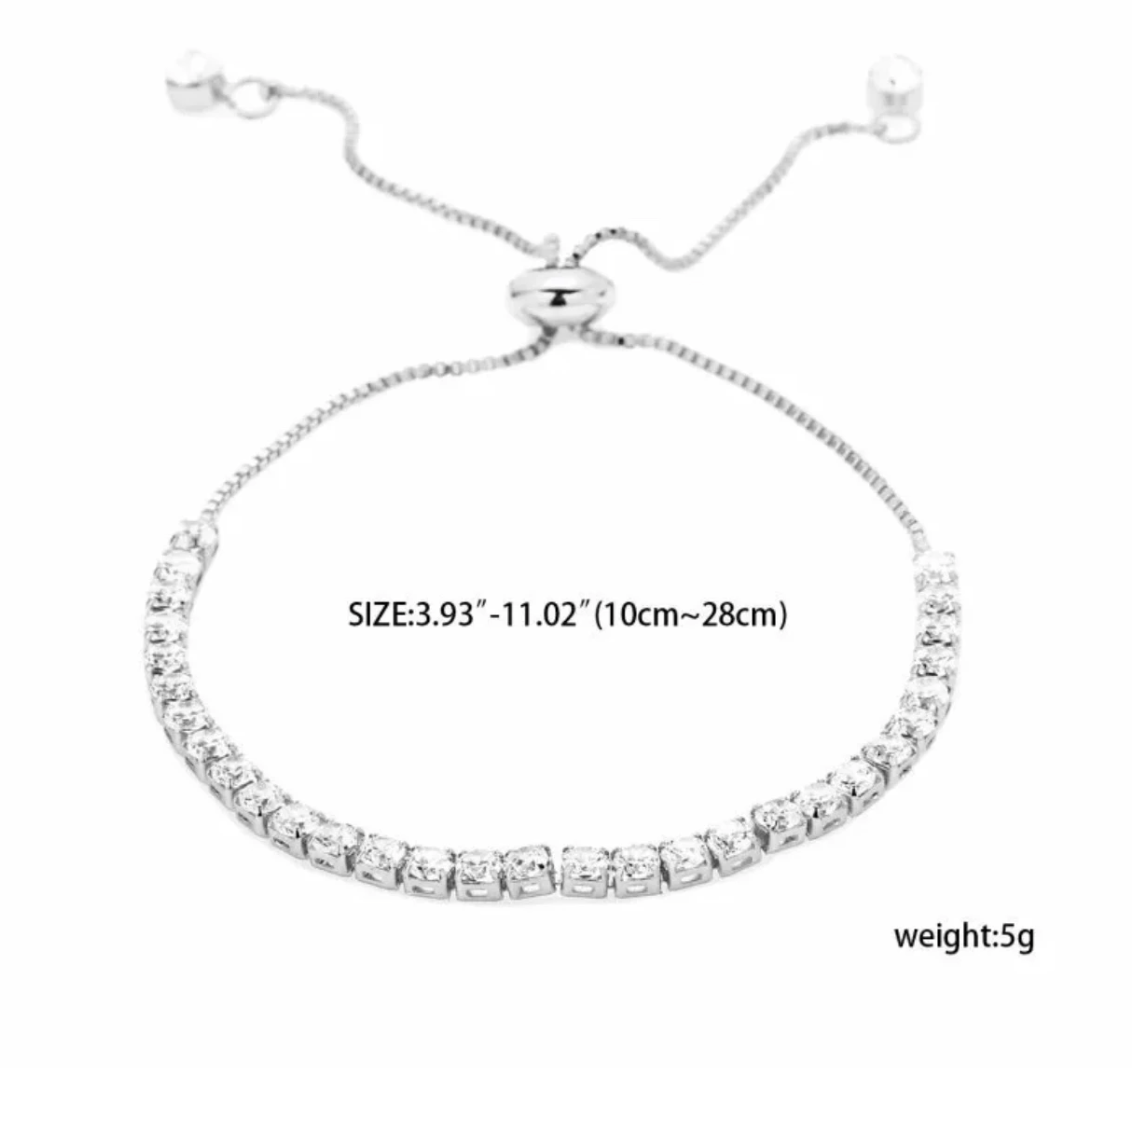 Will you be my Bridesmaid? CZ bracelet!